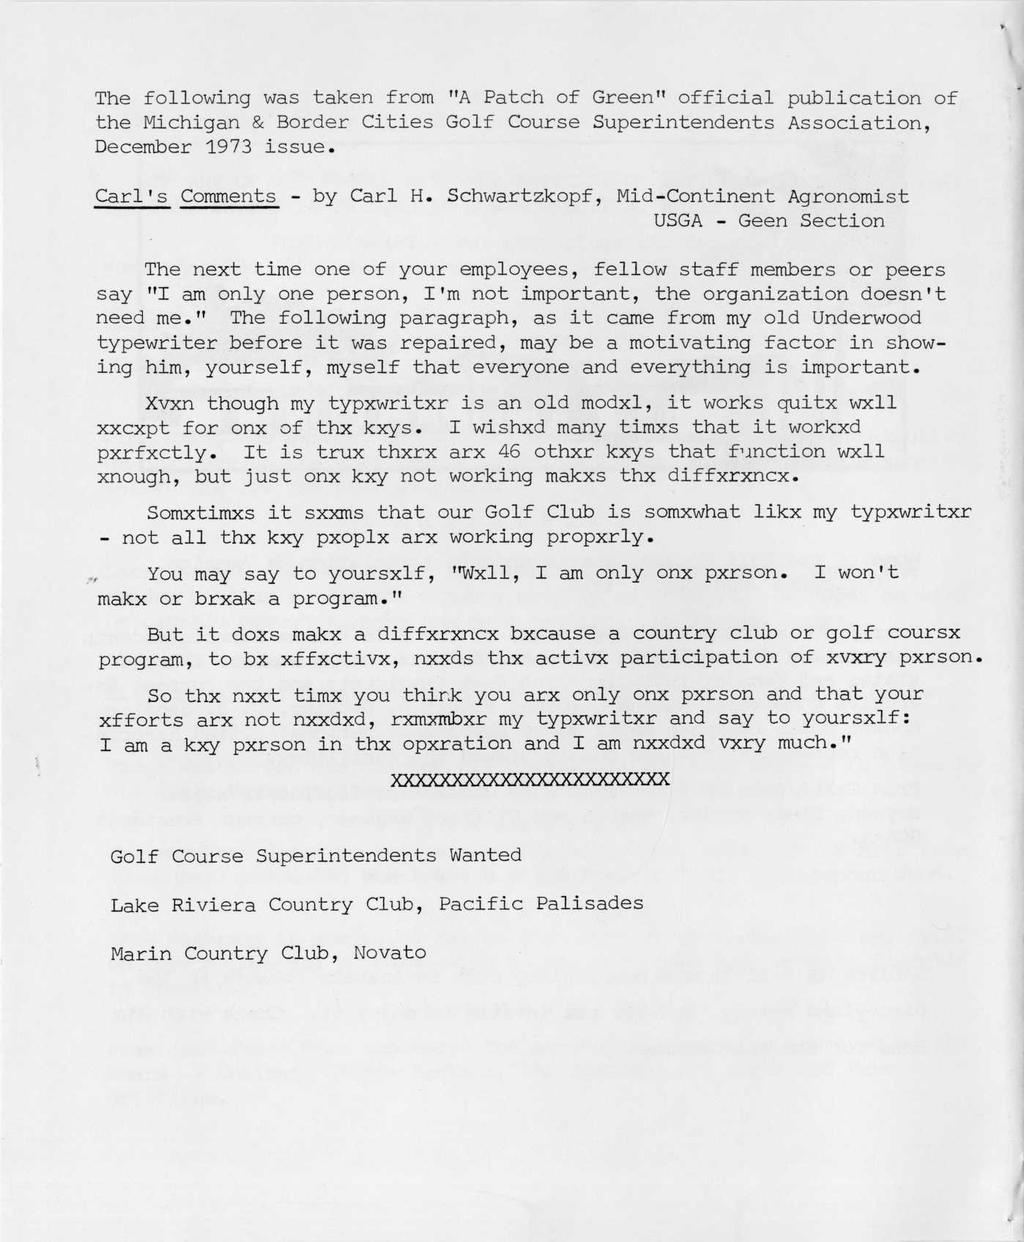 The following was taken from Tf A Patch of Green" official publication of the Michigan & Border Cities Golf Course Superintendents Association, December 1973 issue. Carl's Comments - by Carl H.